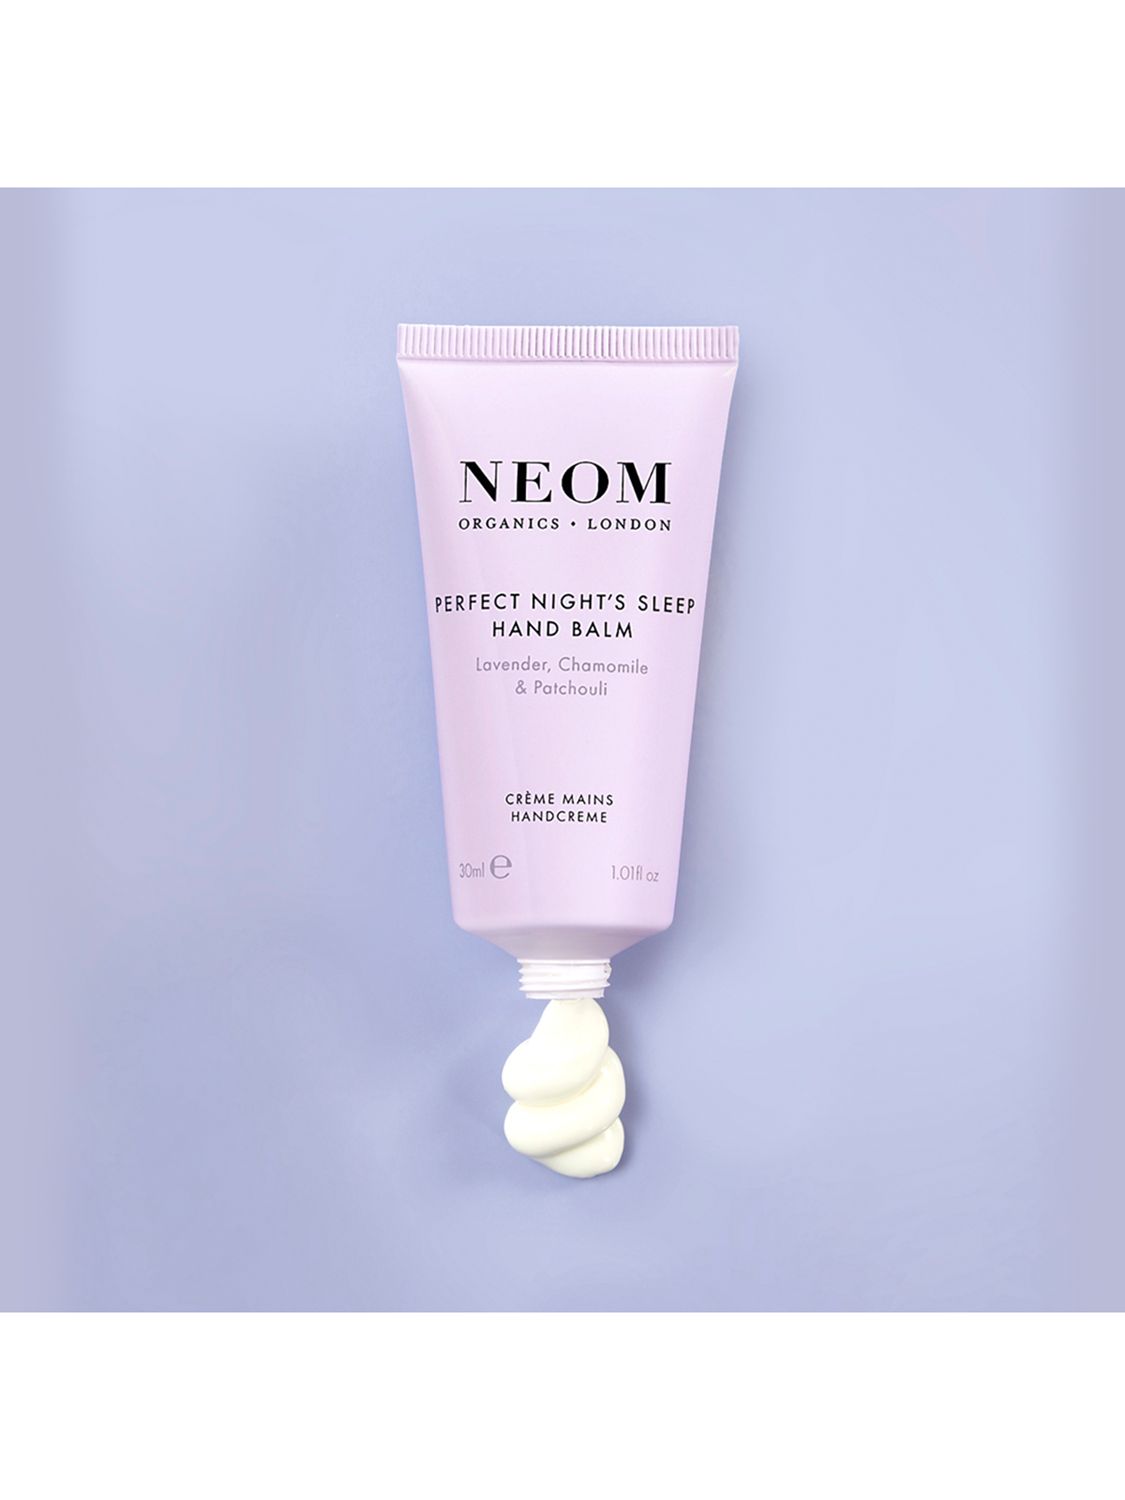 Neom Organics London Moments of Wellbeing In The Palm Of Your Hand Bodycare Gift Set 8